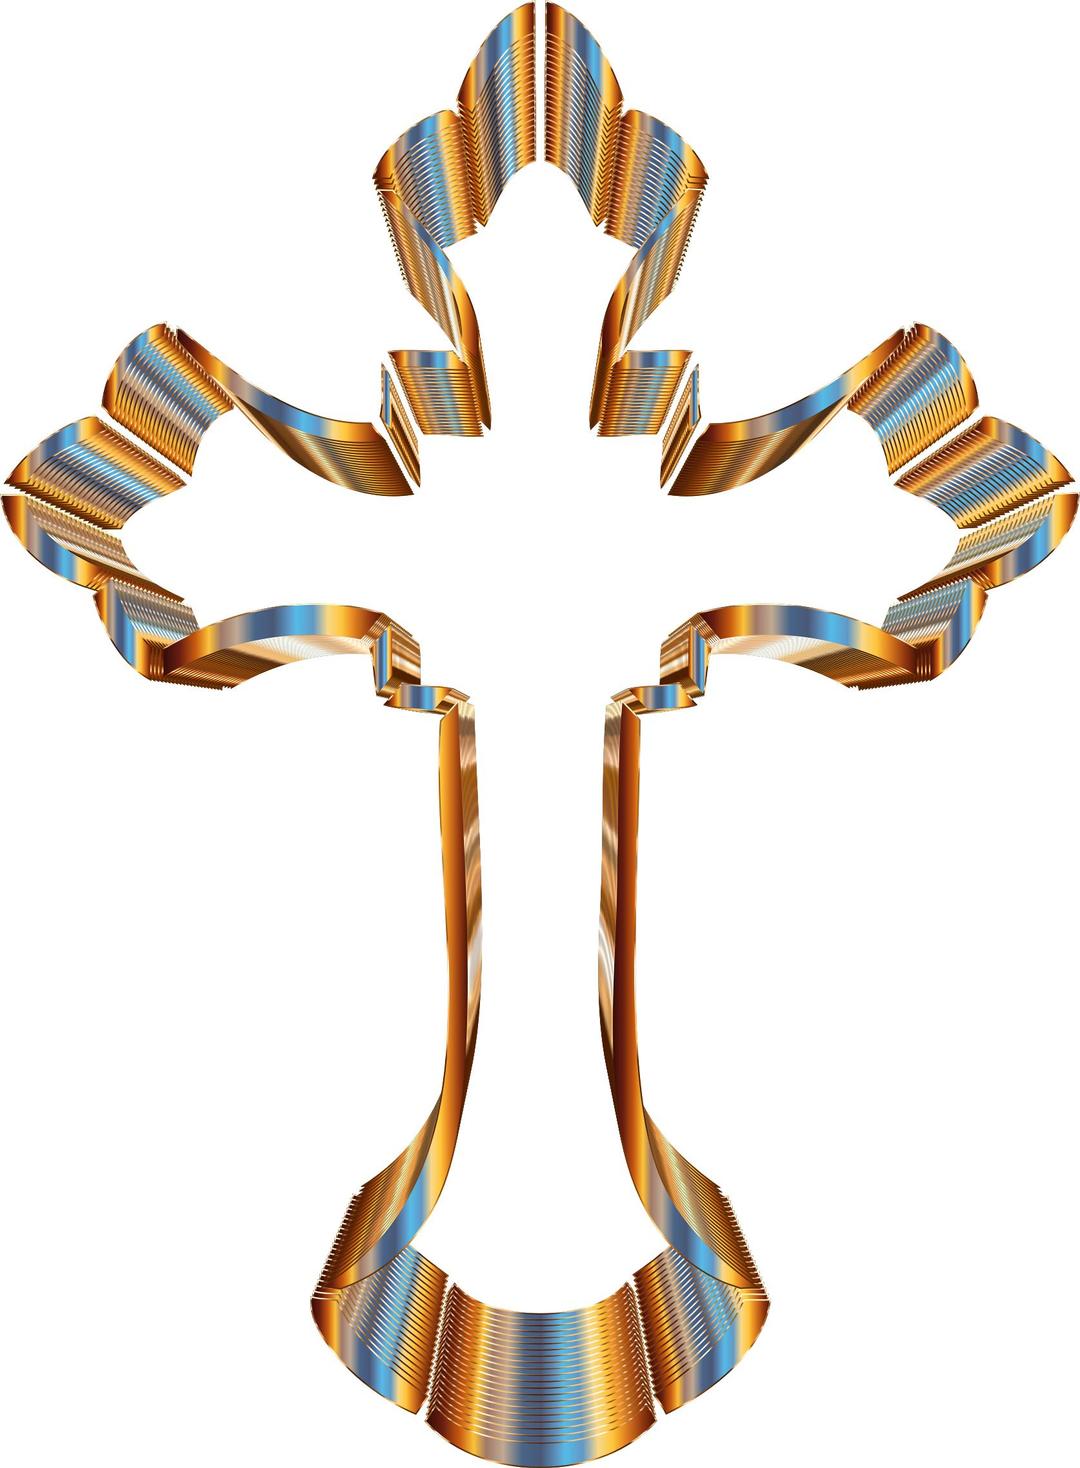 Chromatic Ornate Cross No Background png transparent